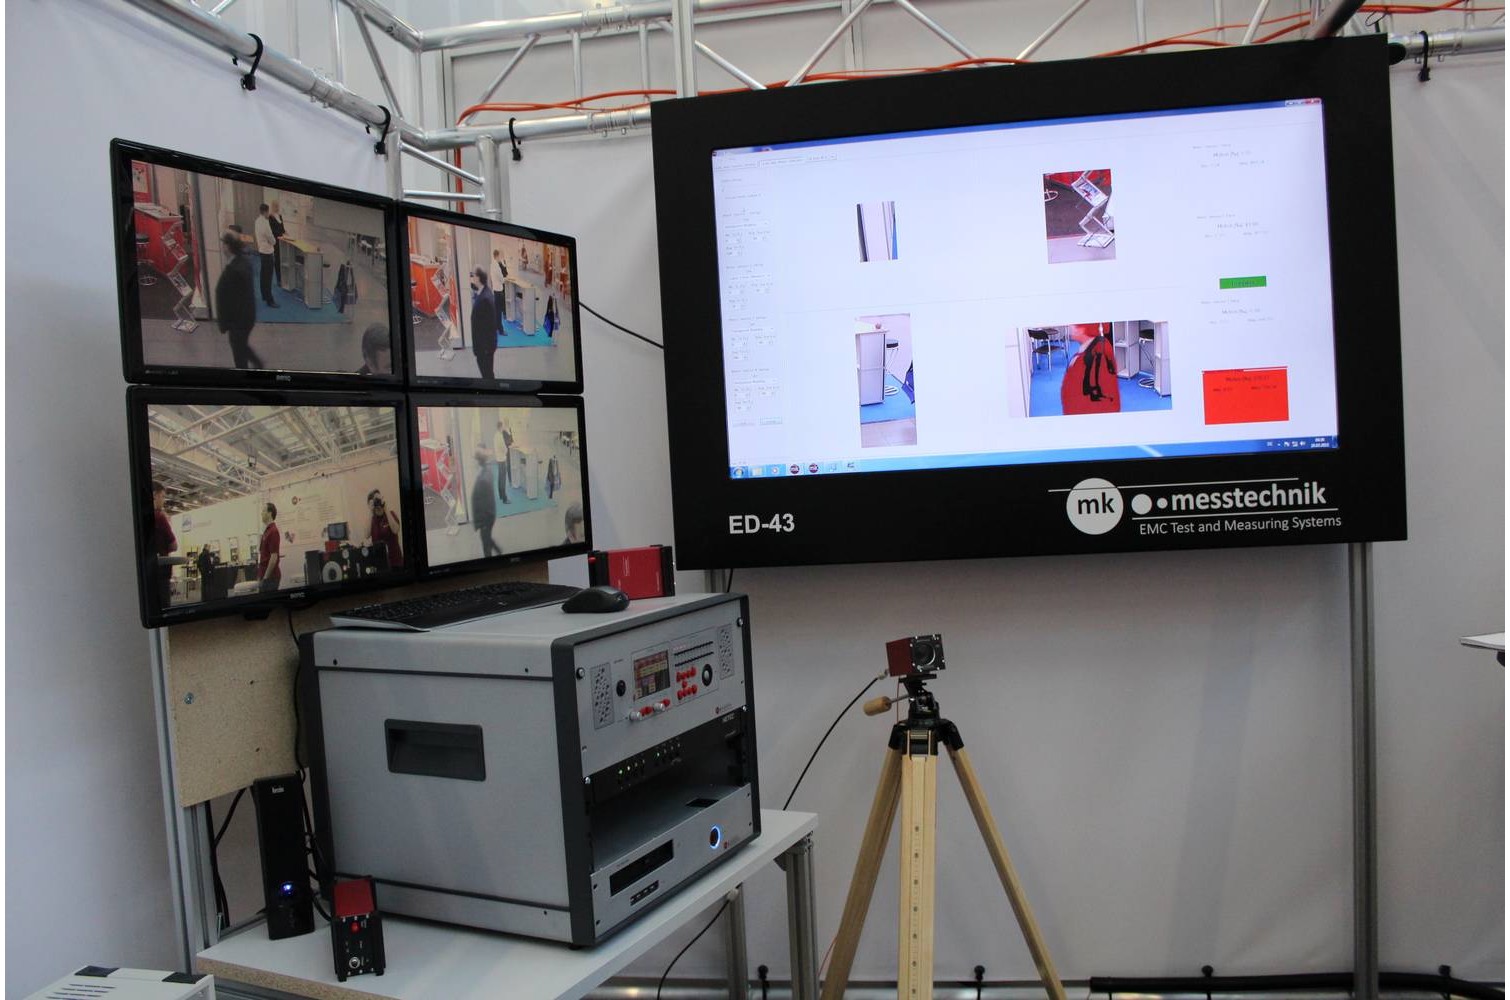 Switch matrix to the left and motion detection software running on the large screen